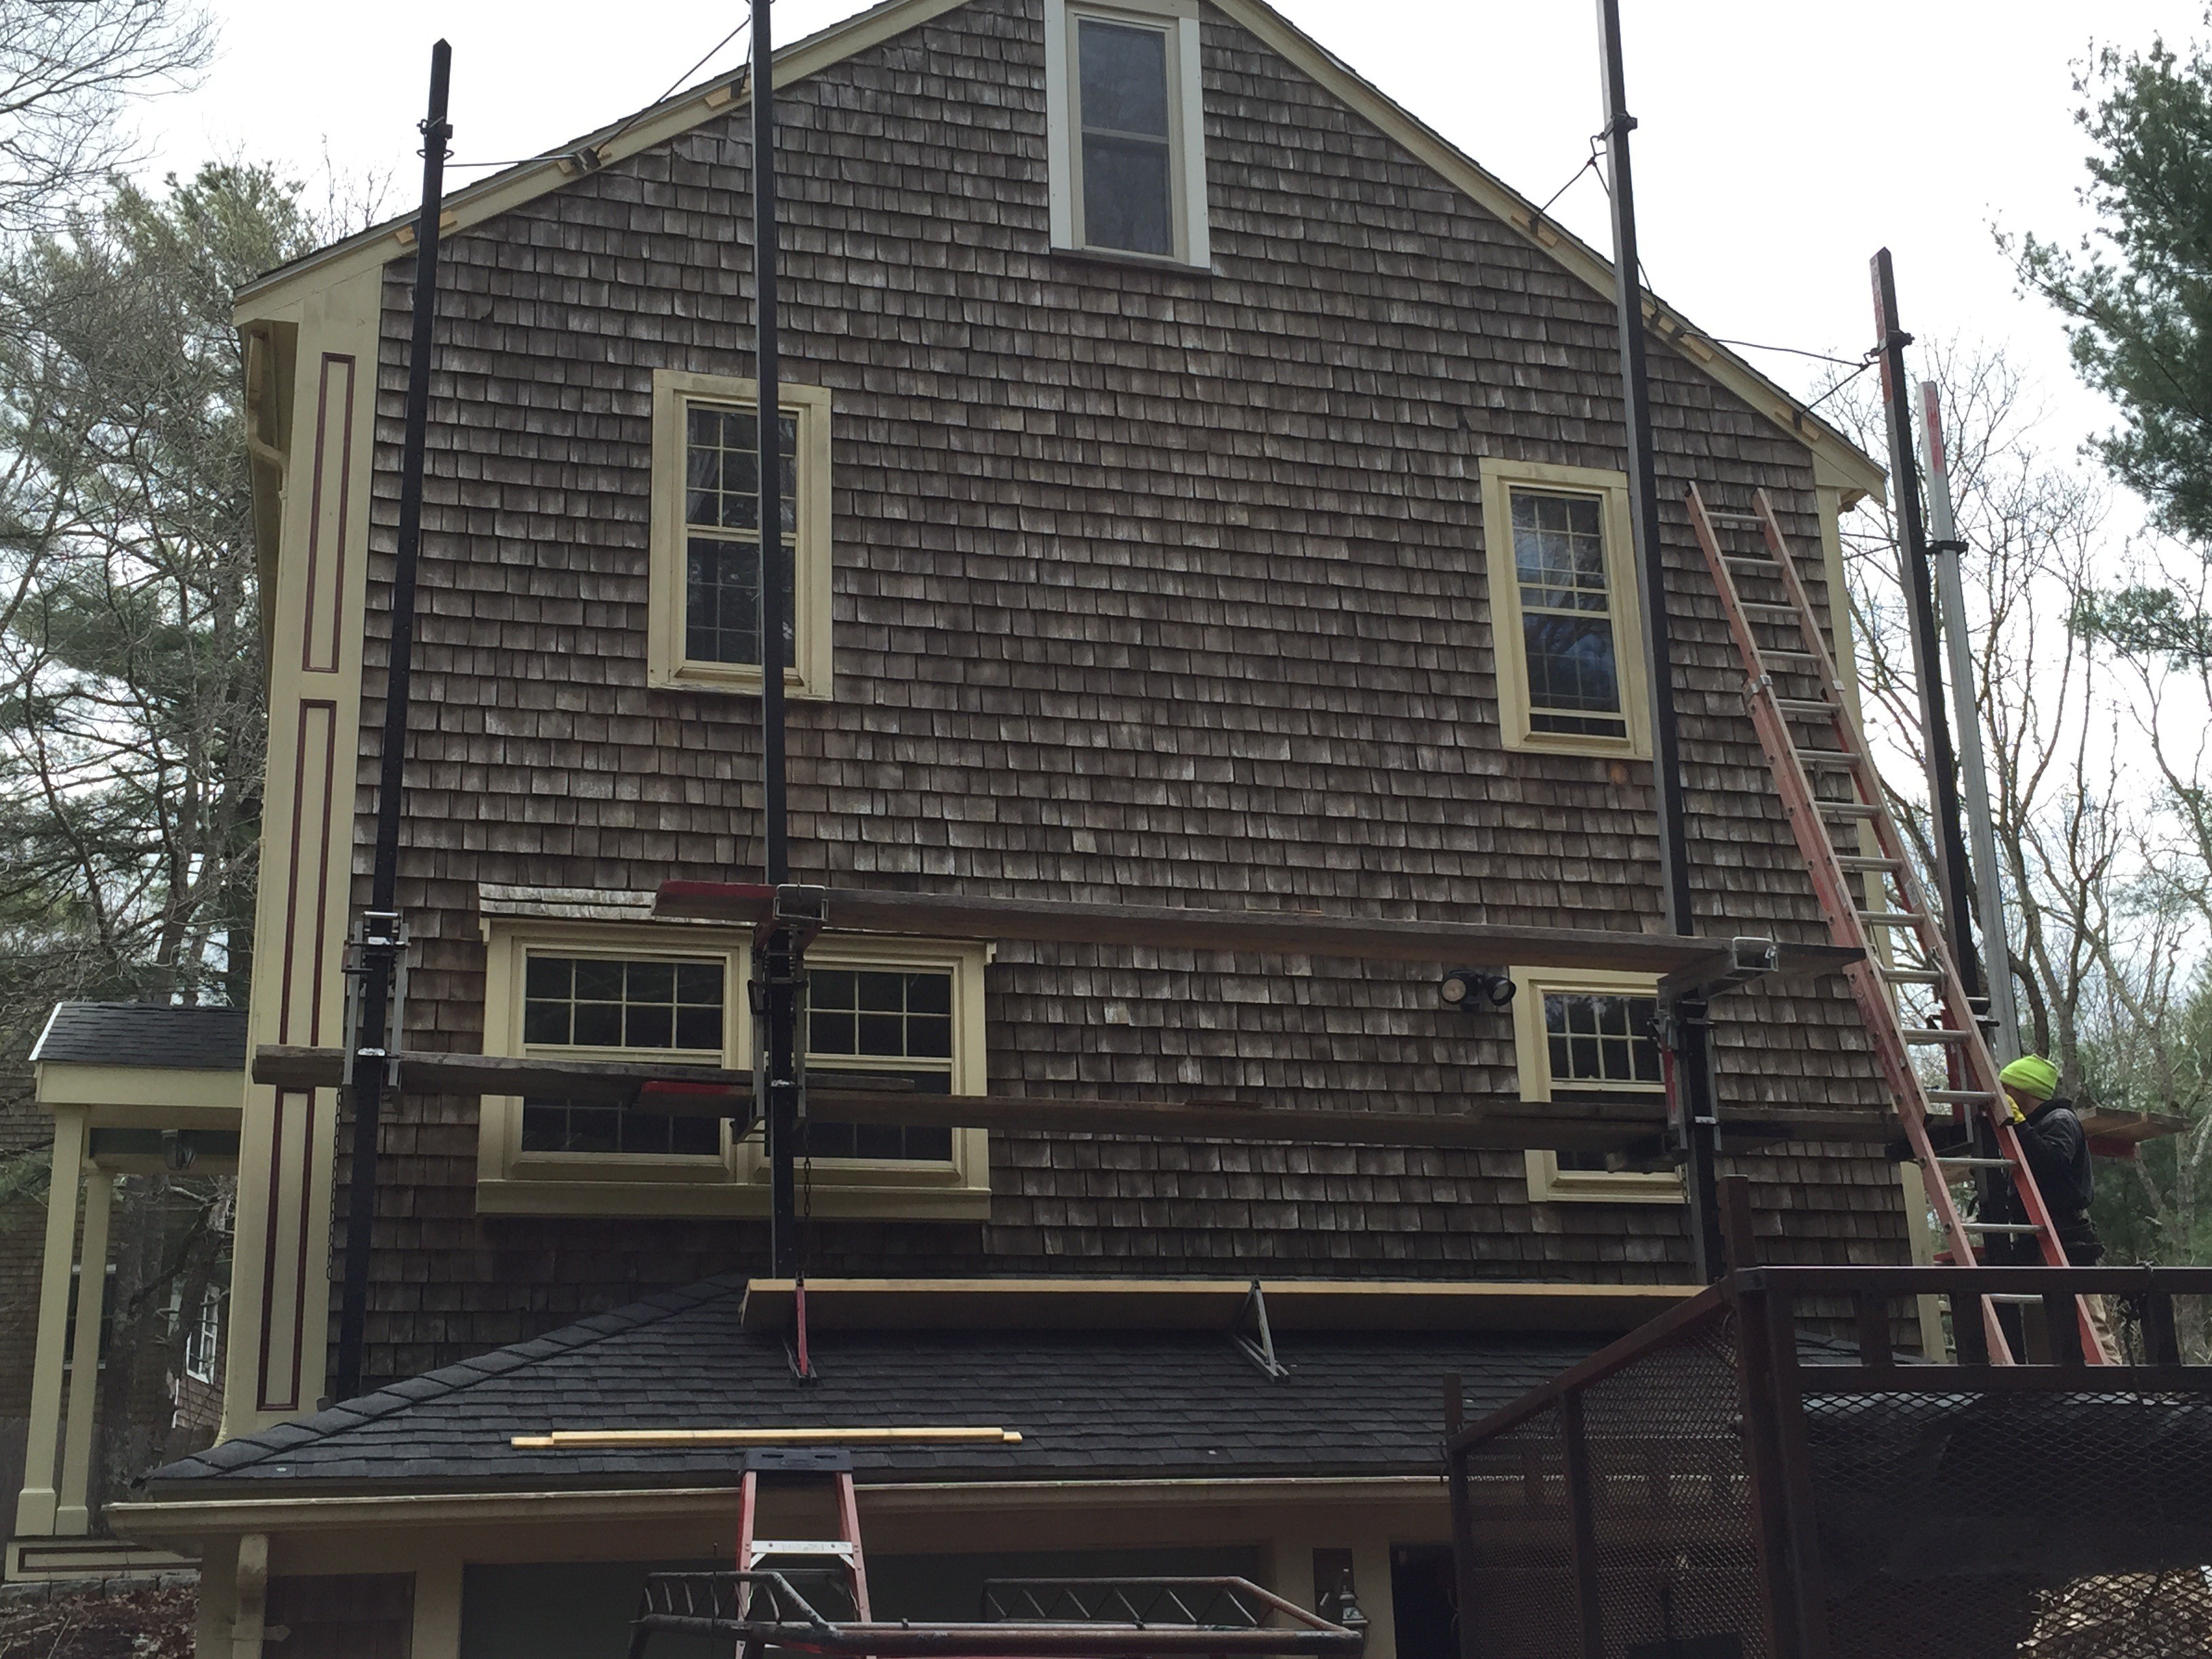 Manomet roofing and siding